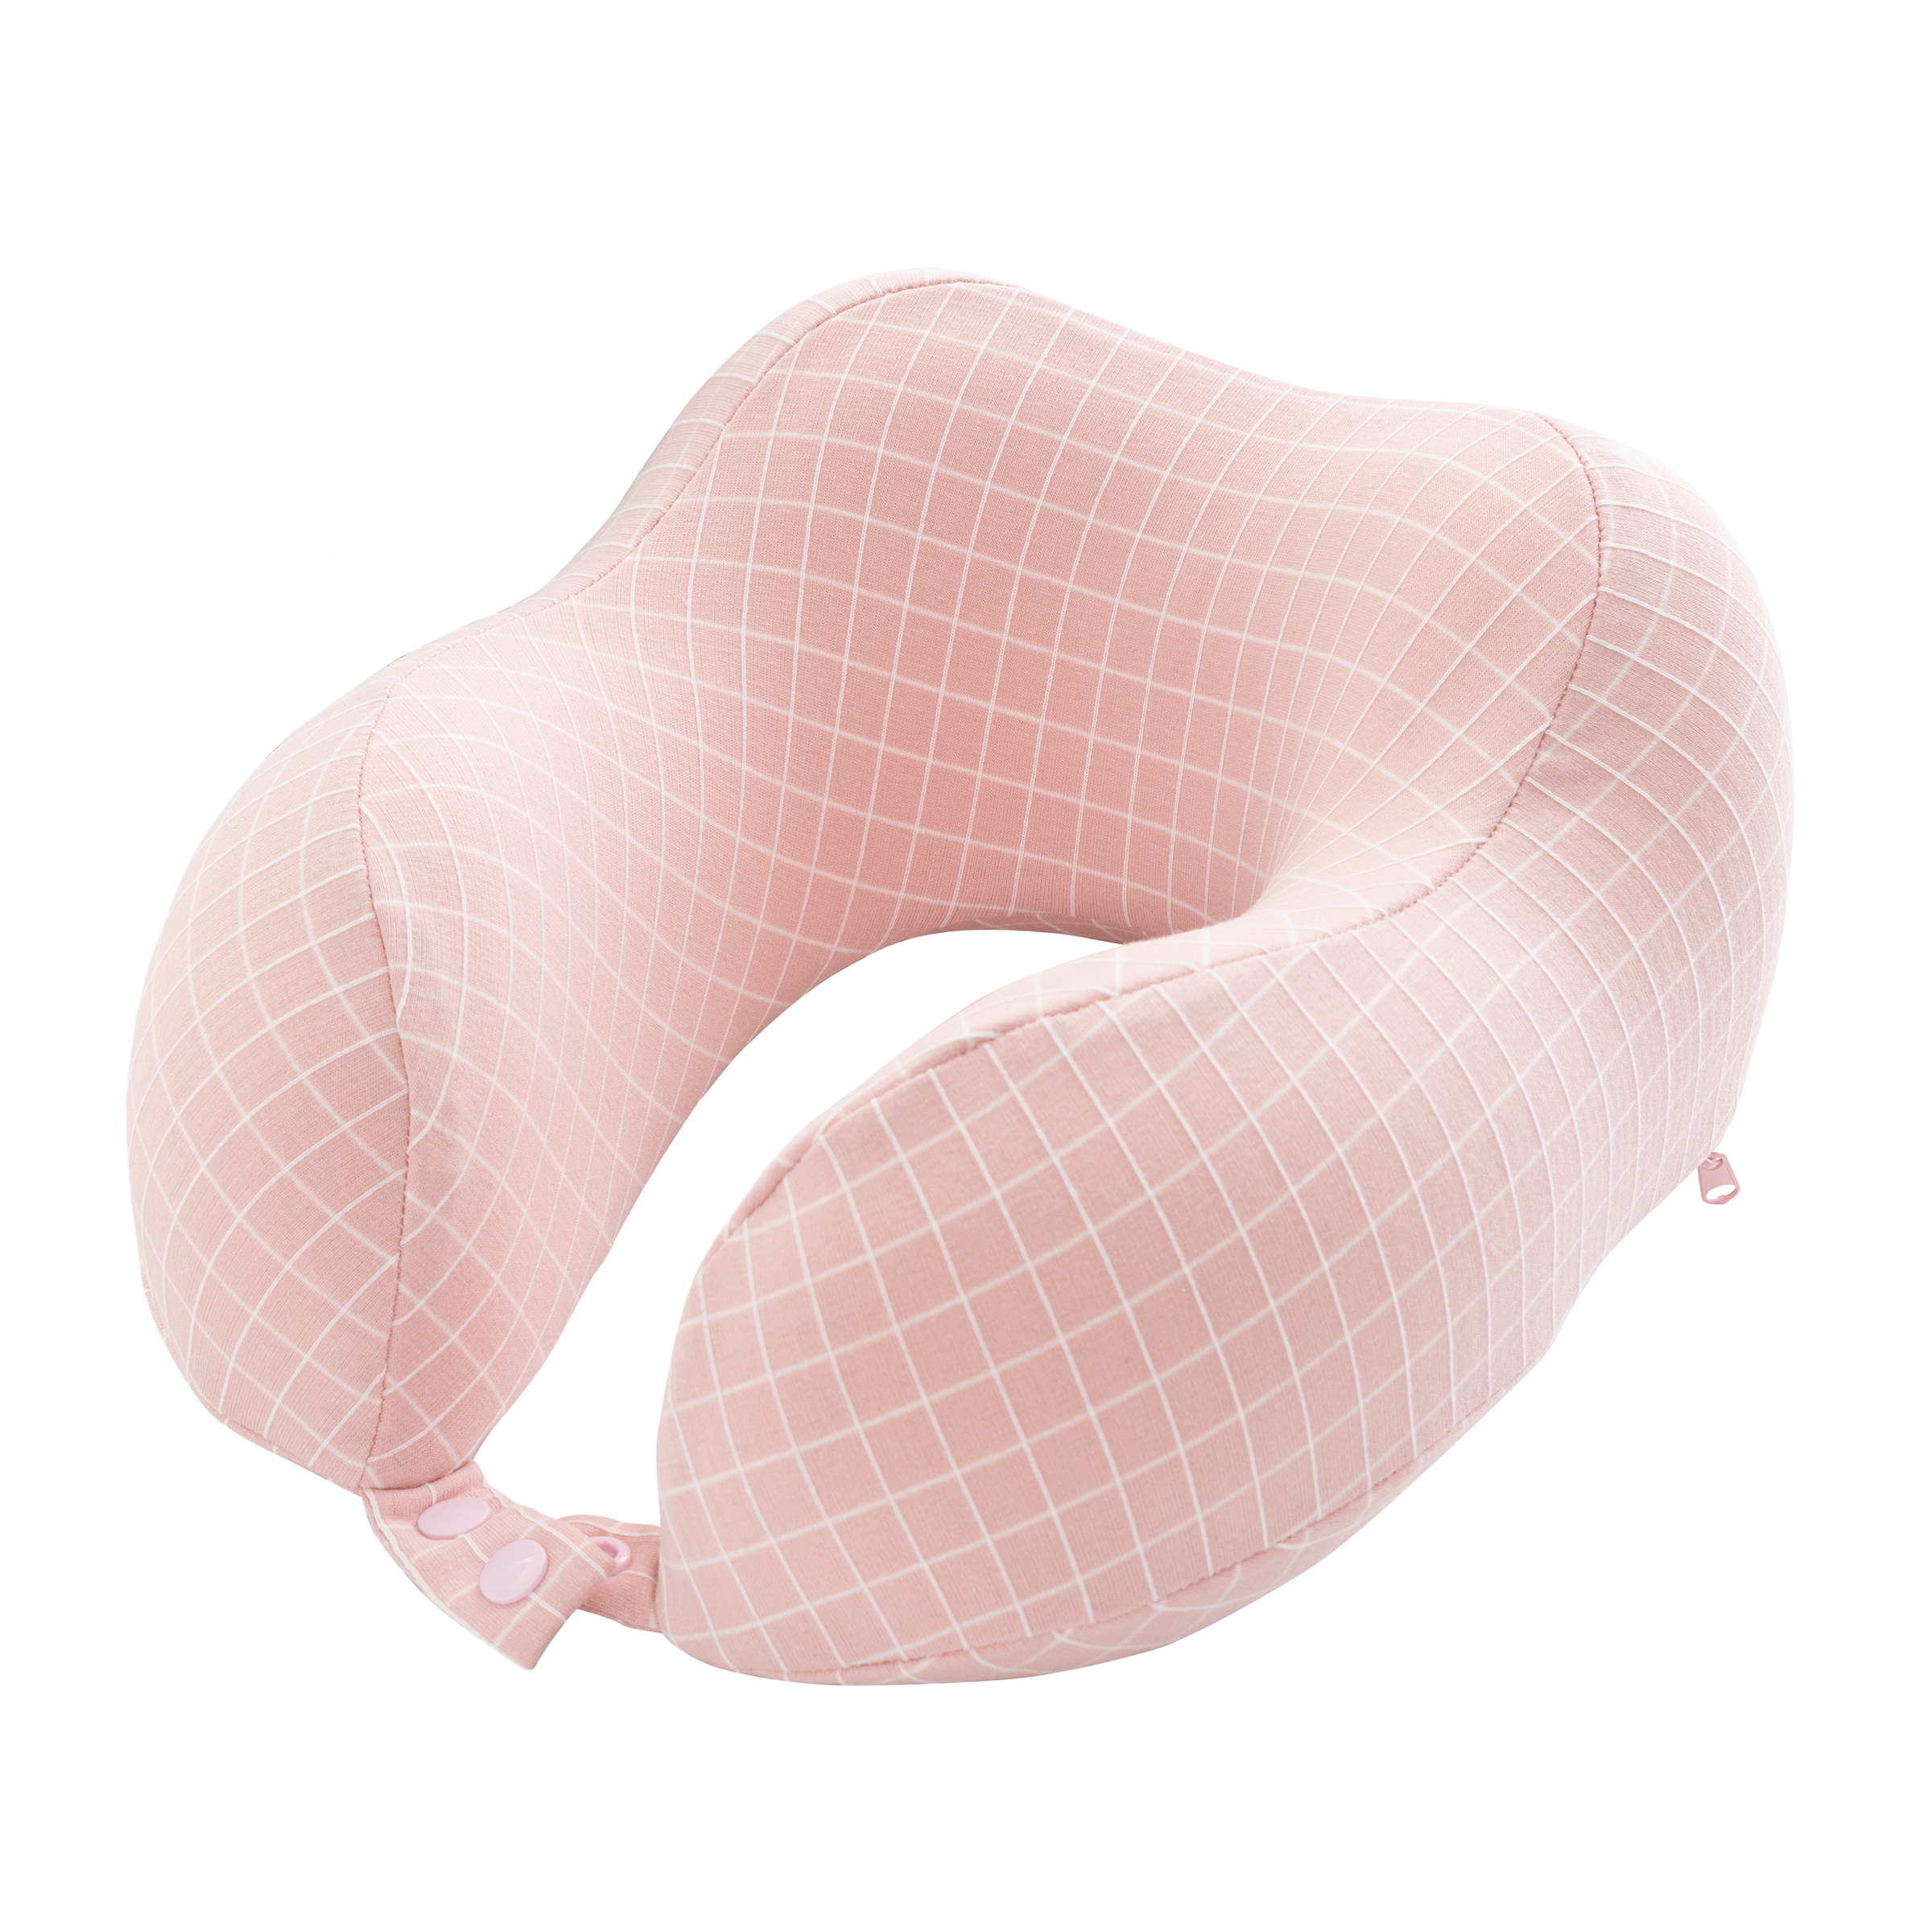 Travel Pillow - Memory Foam Pillow With Washable Cover - Neck Pillows For Sleeping On Airplanes, Trains, And Cars By Home-Complete (Pink)